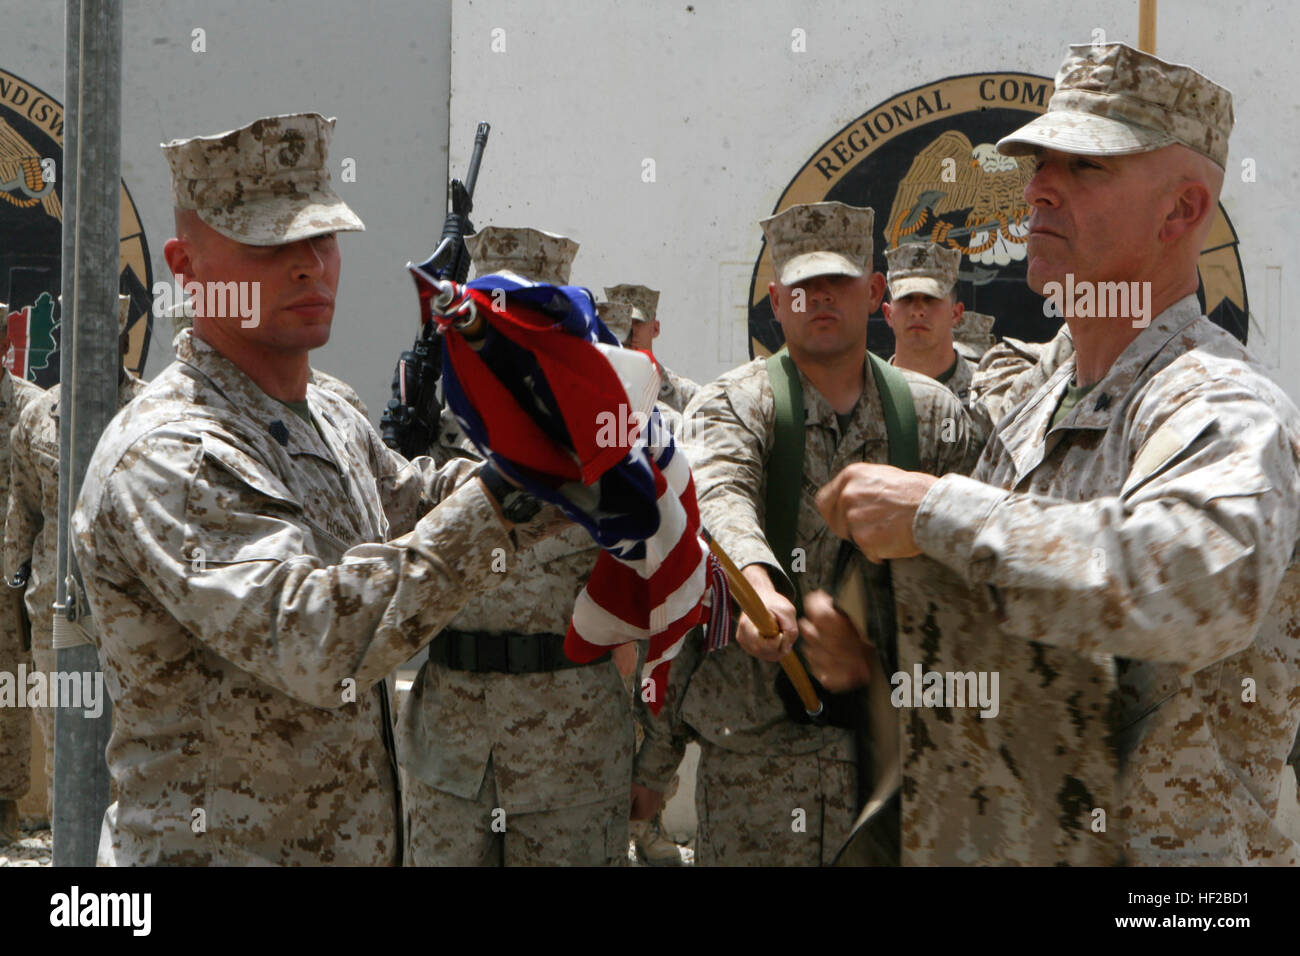 First Sgt. James J. Horr, left, senior staff noncommissioned officer of Brigade Headquarters Group - Afghanistan, and Lt. Col. Joseph J. Zarba, commanding officer of BHG-A, case the American flag during a ceremony for BHG-A aboard Camp Leatherneck, Afghanistan, July 25, 2014. Brigade Headquarters Group - Afghanistan deployed to Camp Leatherneck from Camp Pendleton, Calif., during December 2013 and January 2014 to provide administrative and logistical support to the Marines and sailors of Marine Expeditionary Brigade - Afghanistan and will redeploy at the end of July after completing a successf Stock Photo